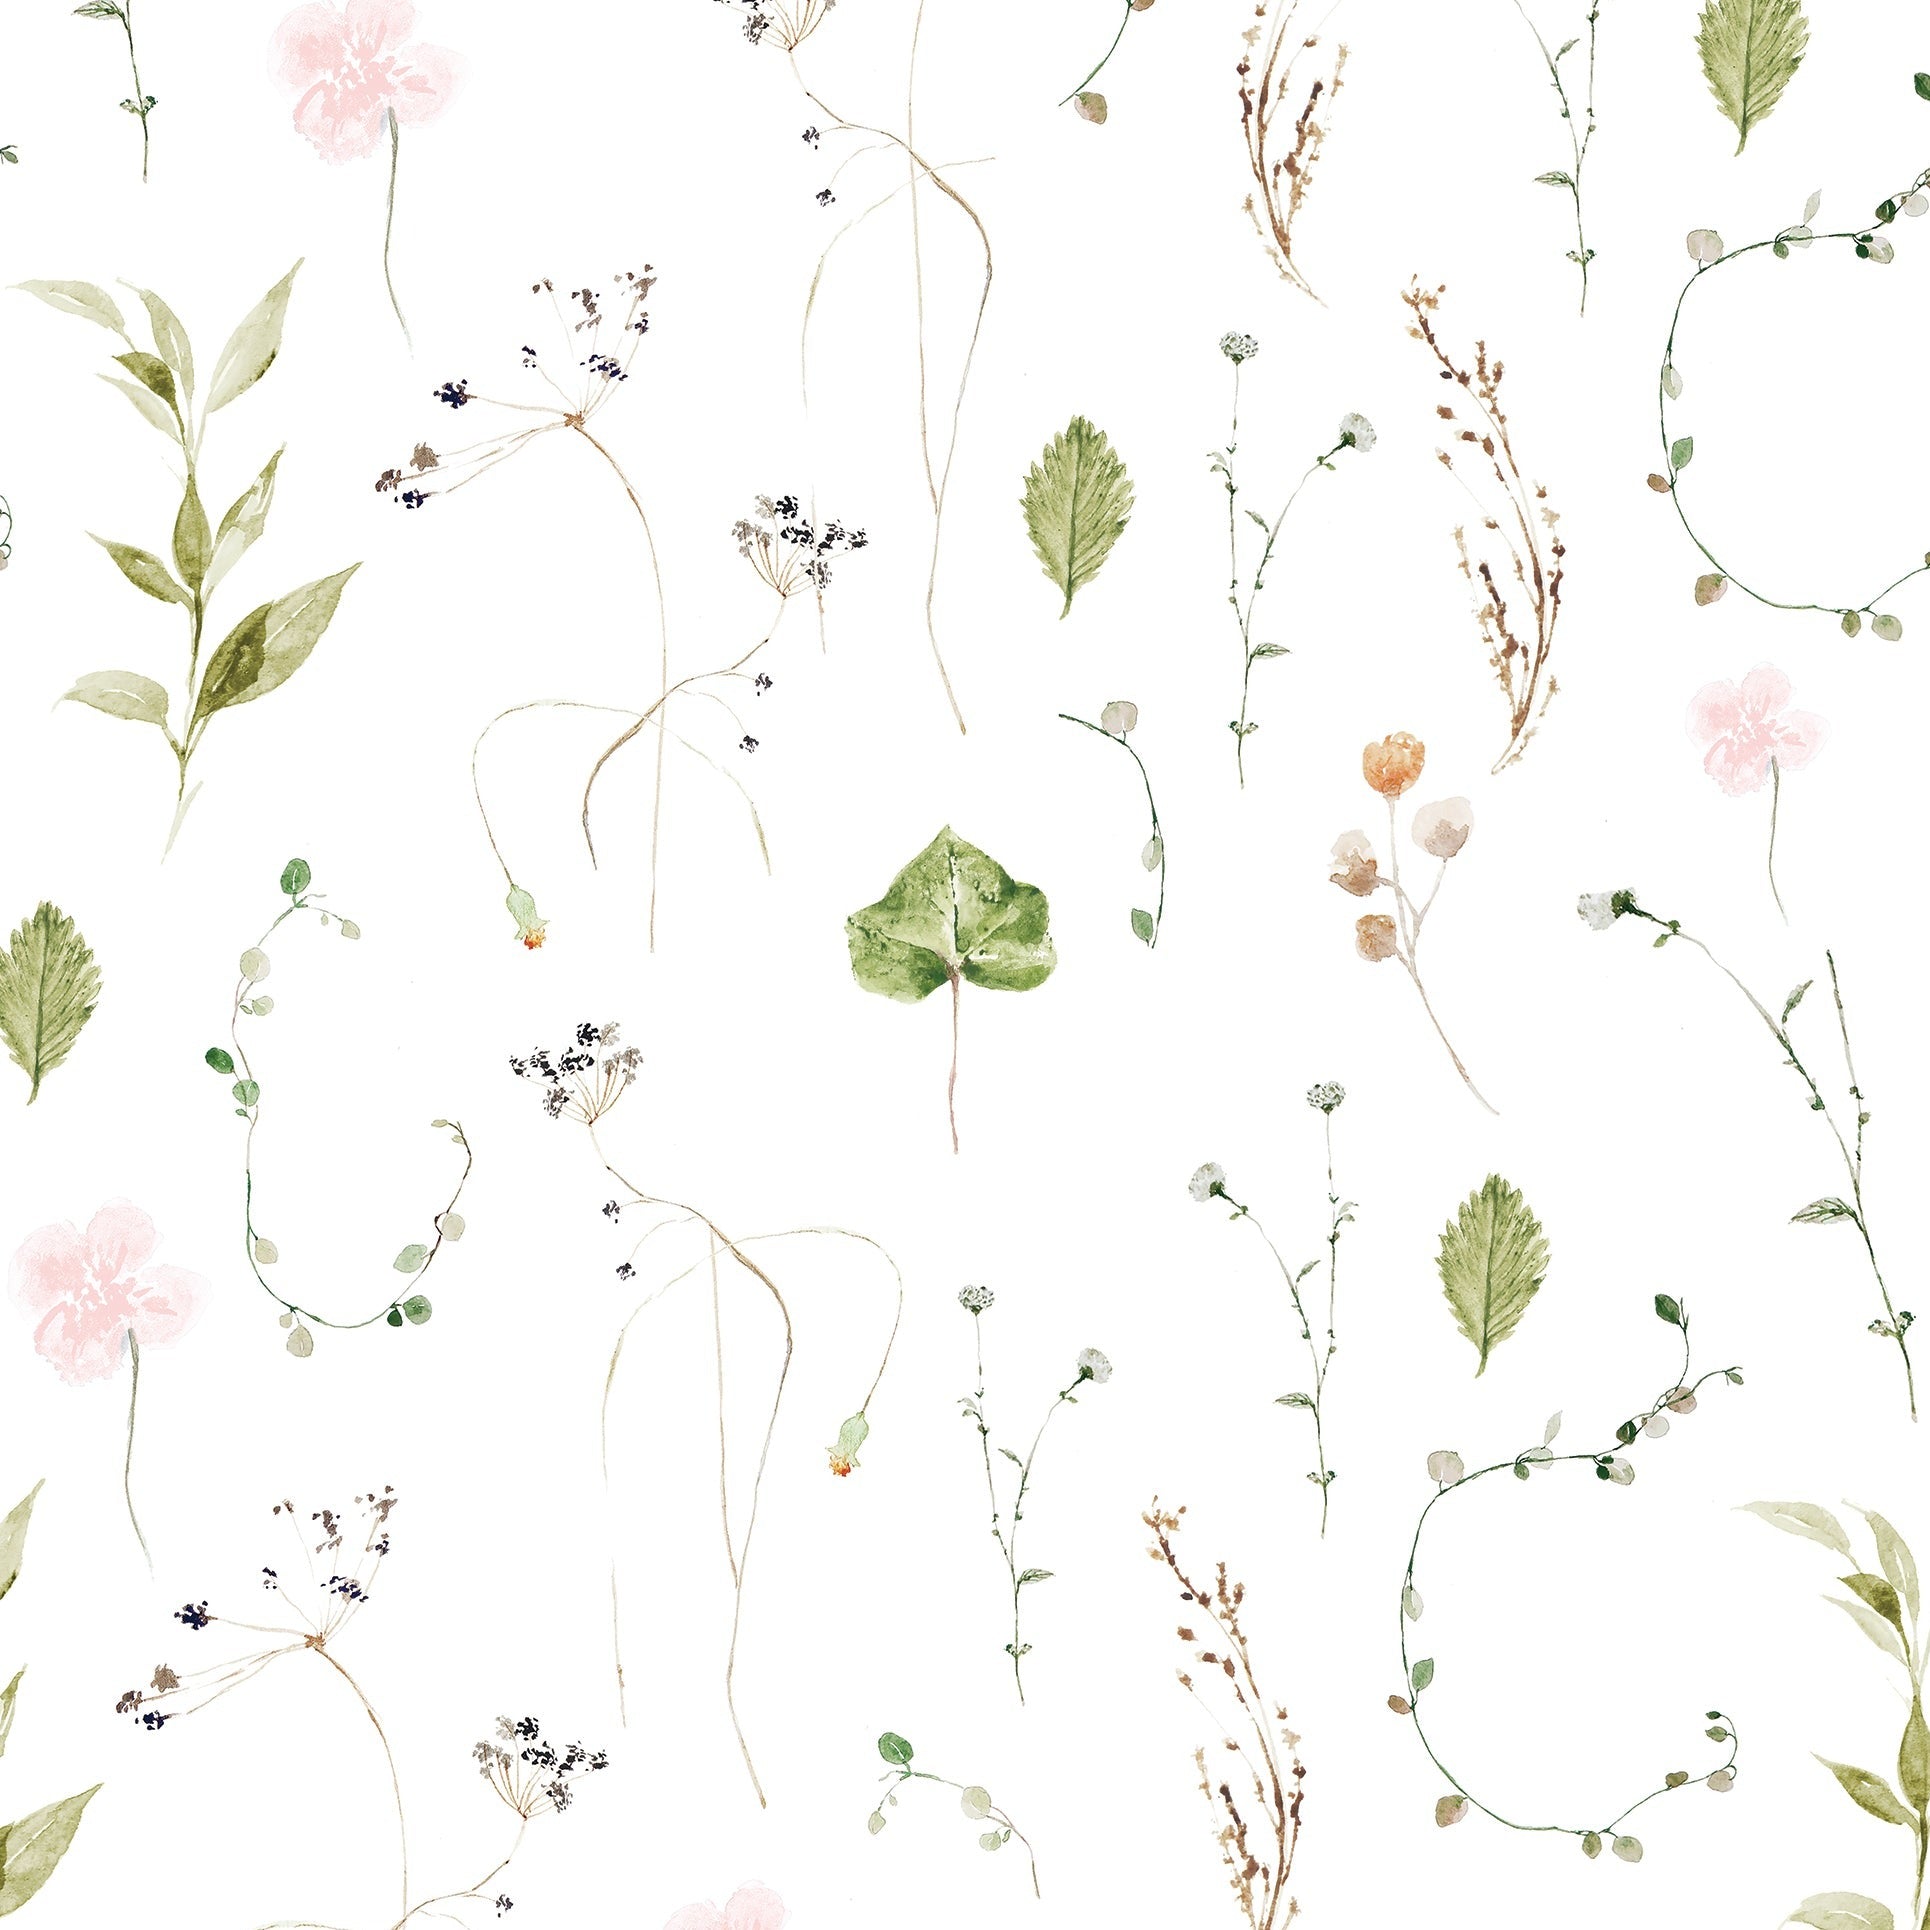 A close-up of the Watercolour Floral Wallpaper in Blush Pink, showcasing an elegant and soothing pattern of hand-painted flowers, leaves, and branches. The gentle pink blooms and soft green foliage set against a clean white background provide a delicate and airy feel, ideal for creating a peaceful and cheerful environment in any room.